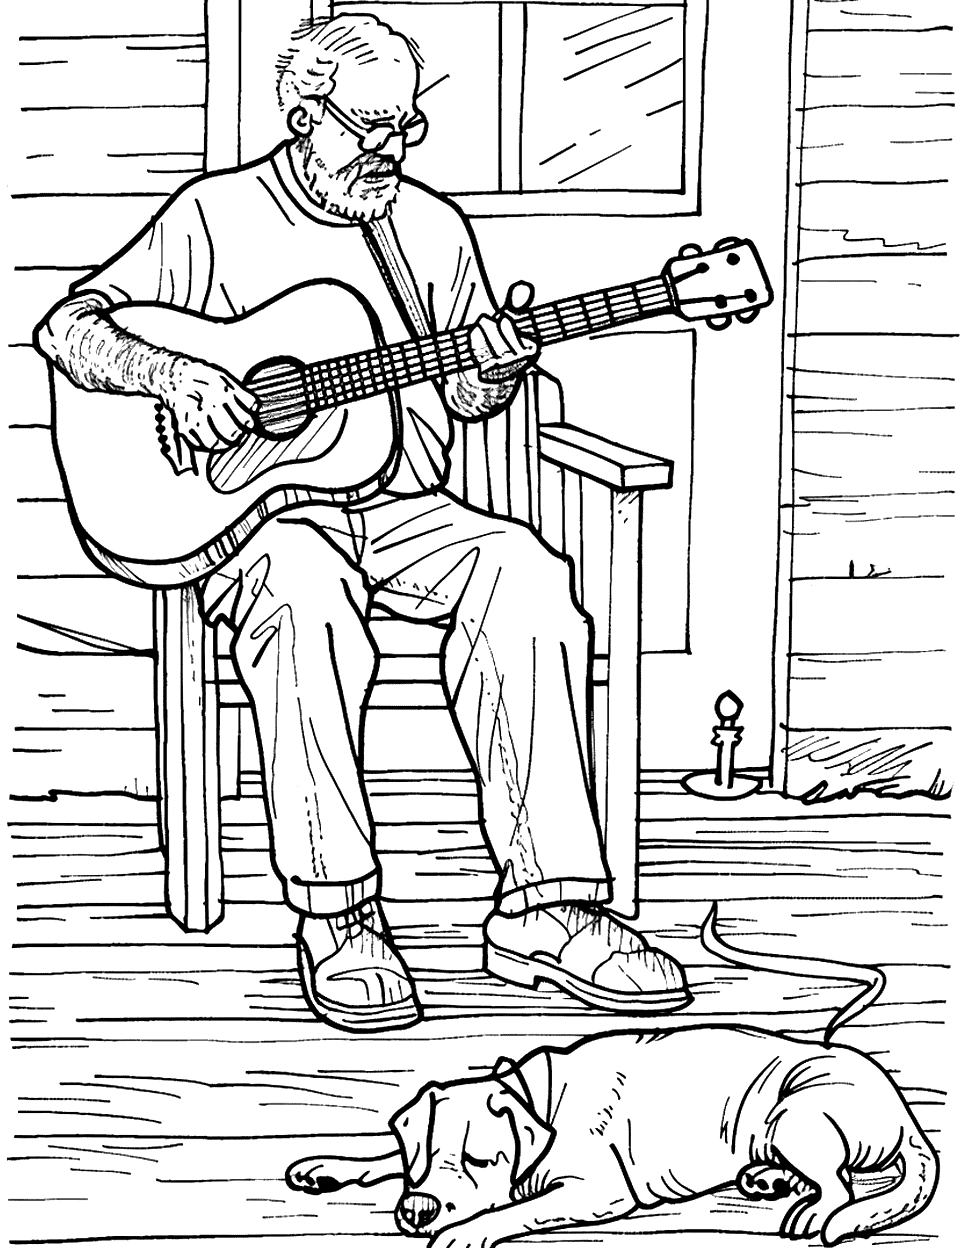 Guitar tunes on the Porch Music Coloring Page - An elderly man playing a guitar on his front porch with a dog lying beside him.